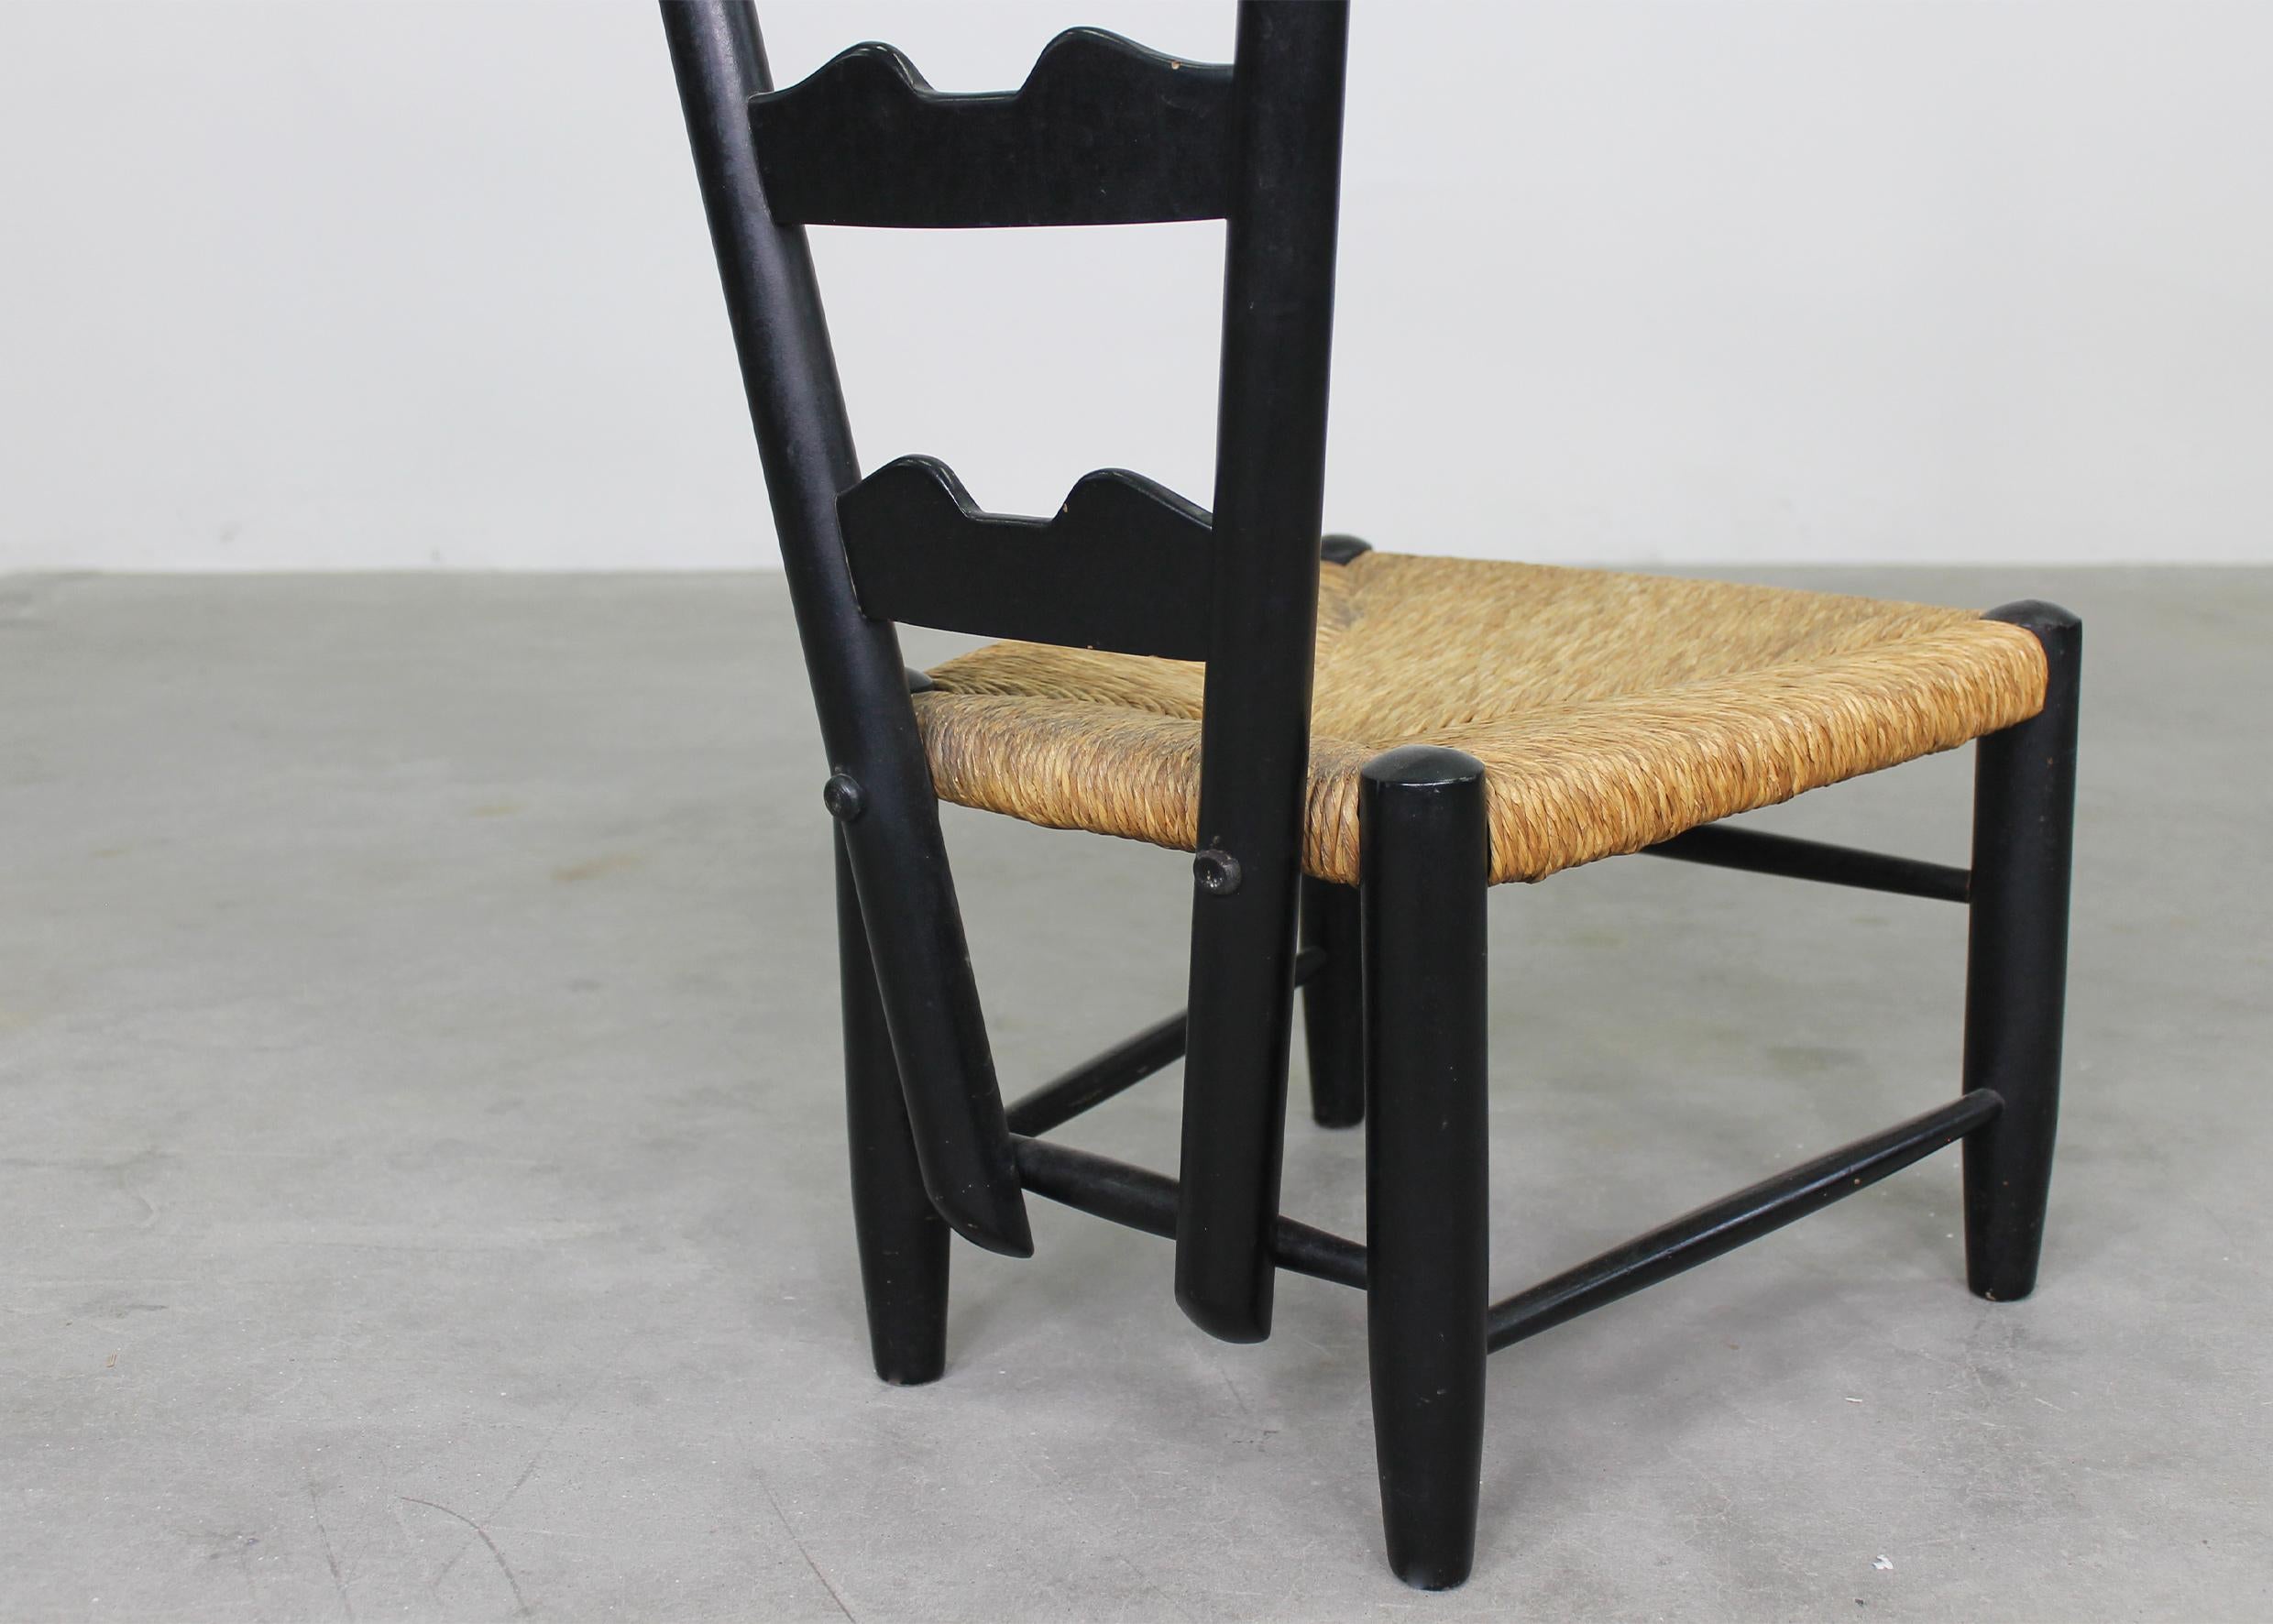 Gio Ponti Set of Two Fireside Chairs in Black Lacquered Wood and Rush 1950s For Sale 3